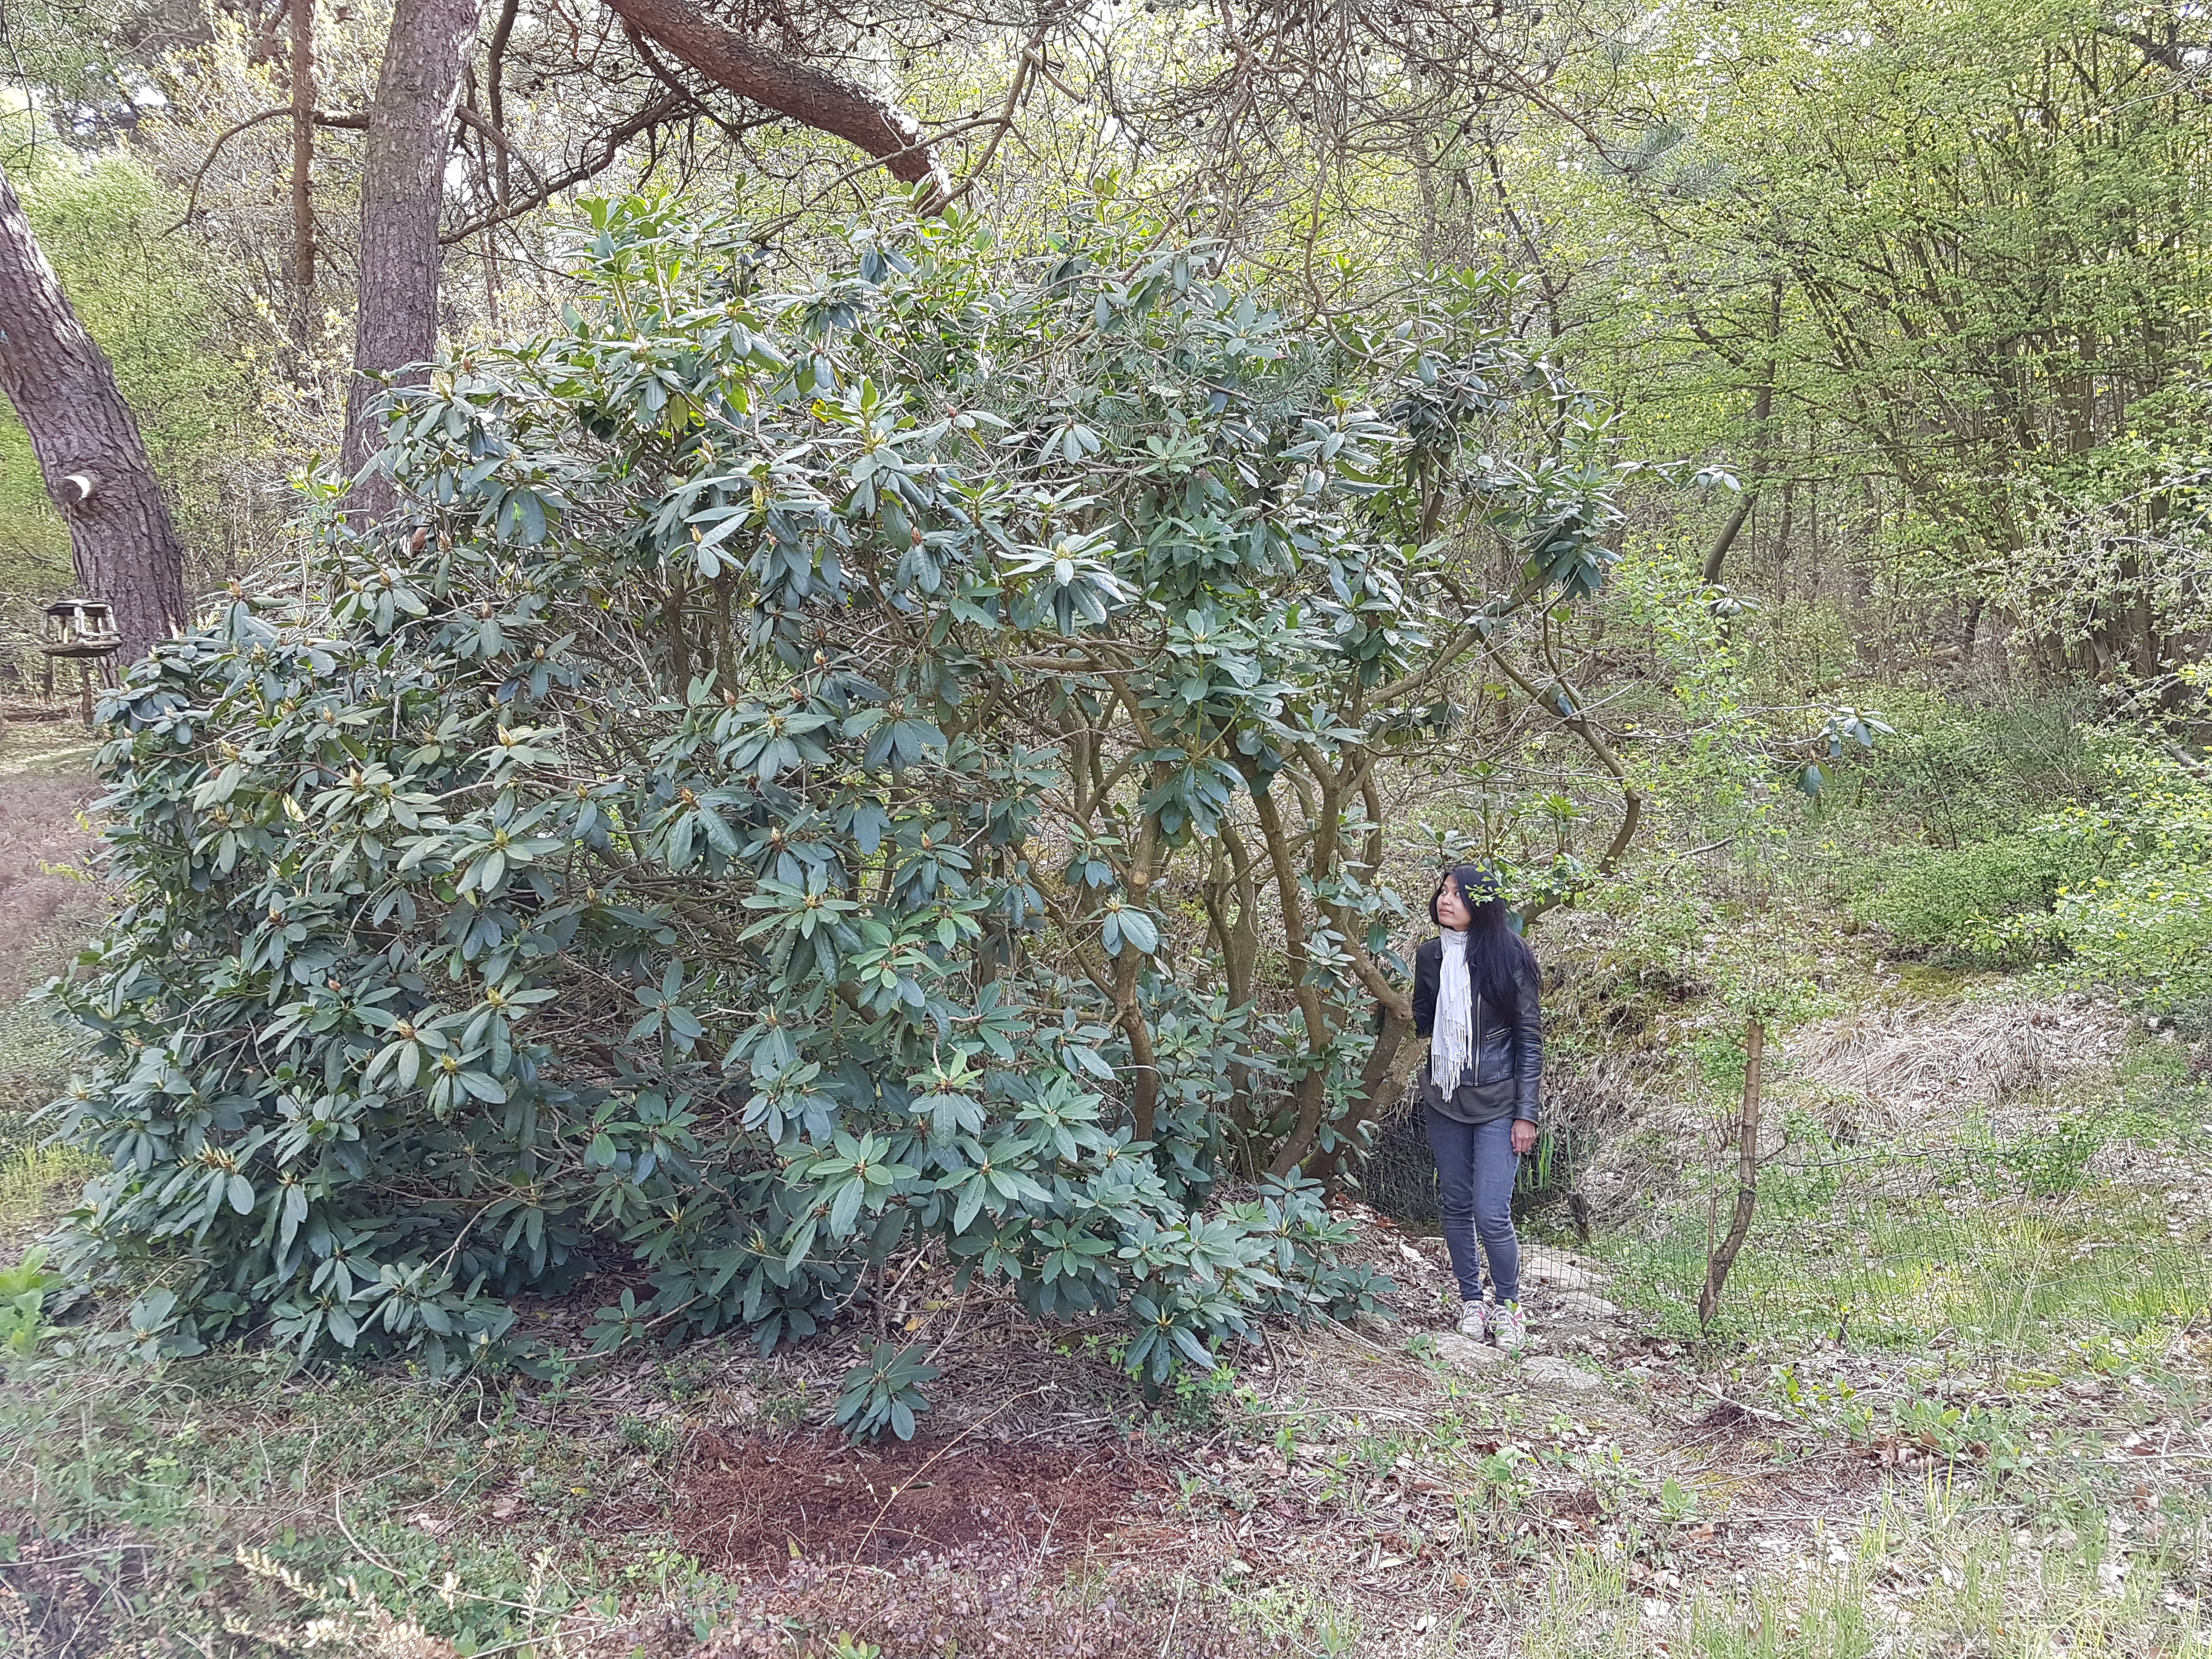 Only a sliver of pond is revealed behind Marilisa, but that sliver is a 100% more than what was visible in 2016 before she severely cut back the Rhododendron.